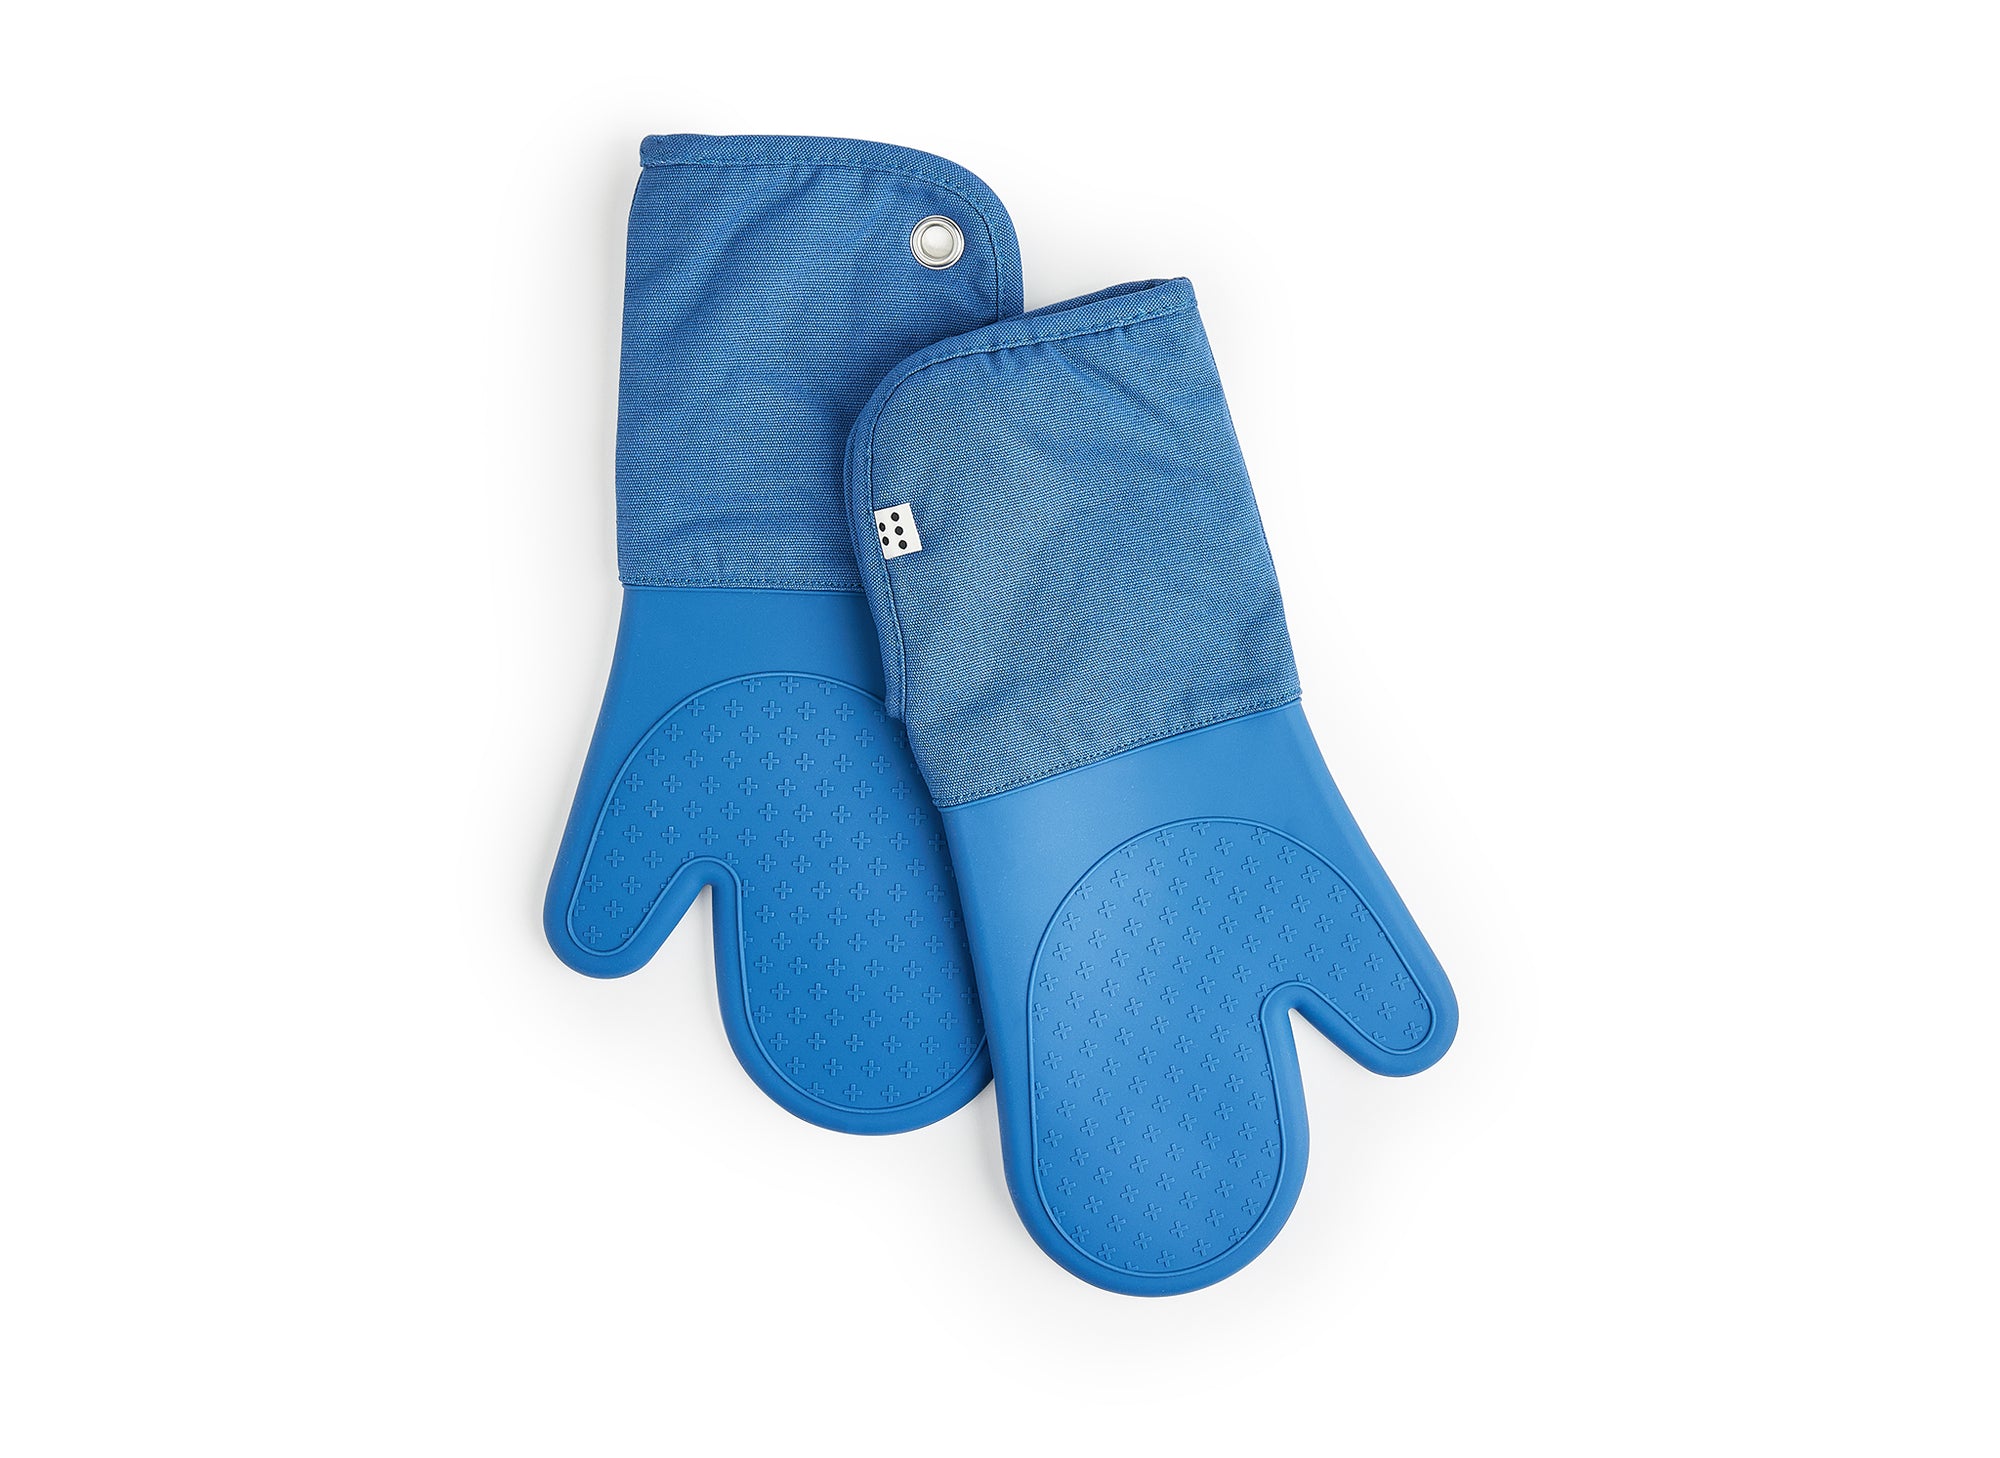 High-Quality Oven Mitts for Your Kitchen